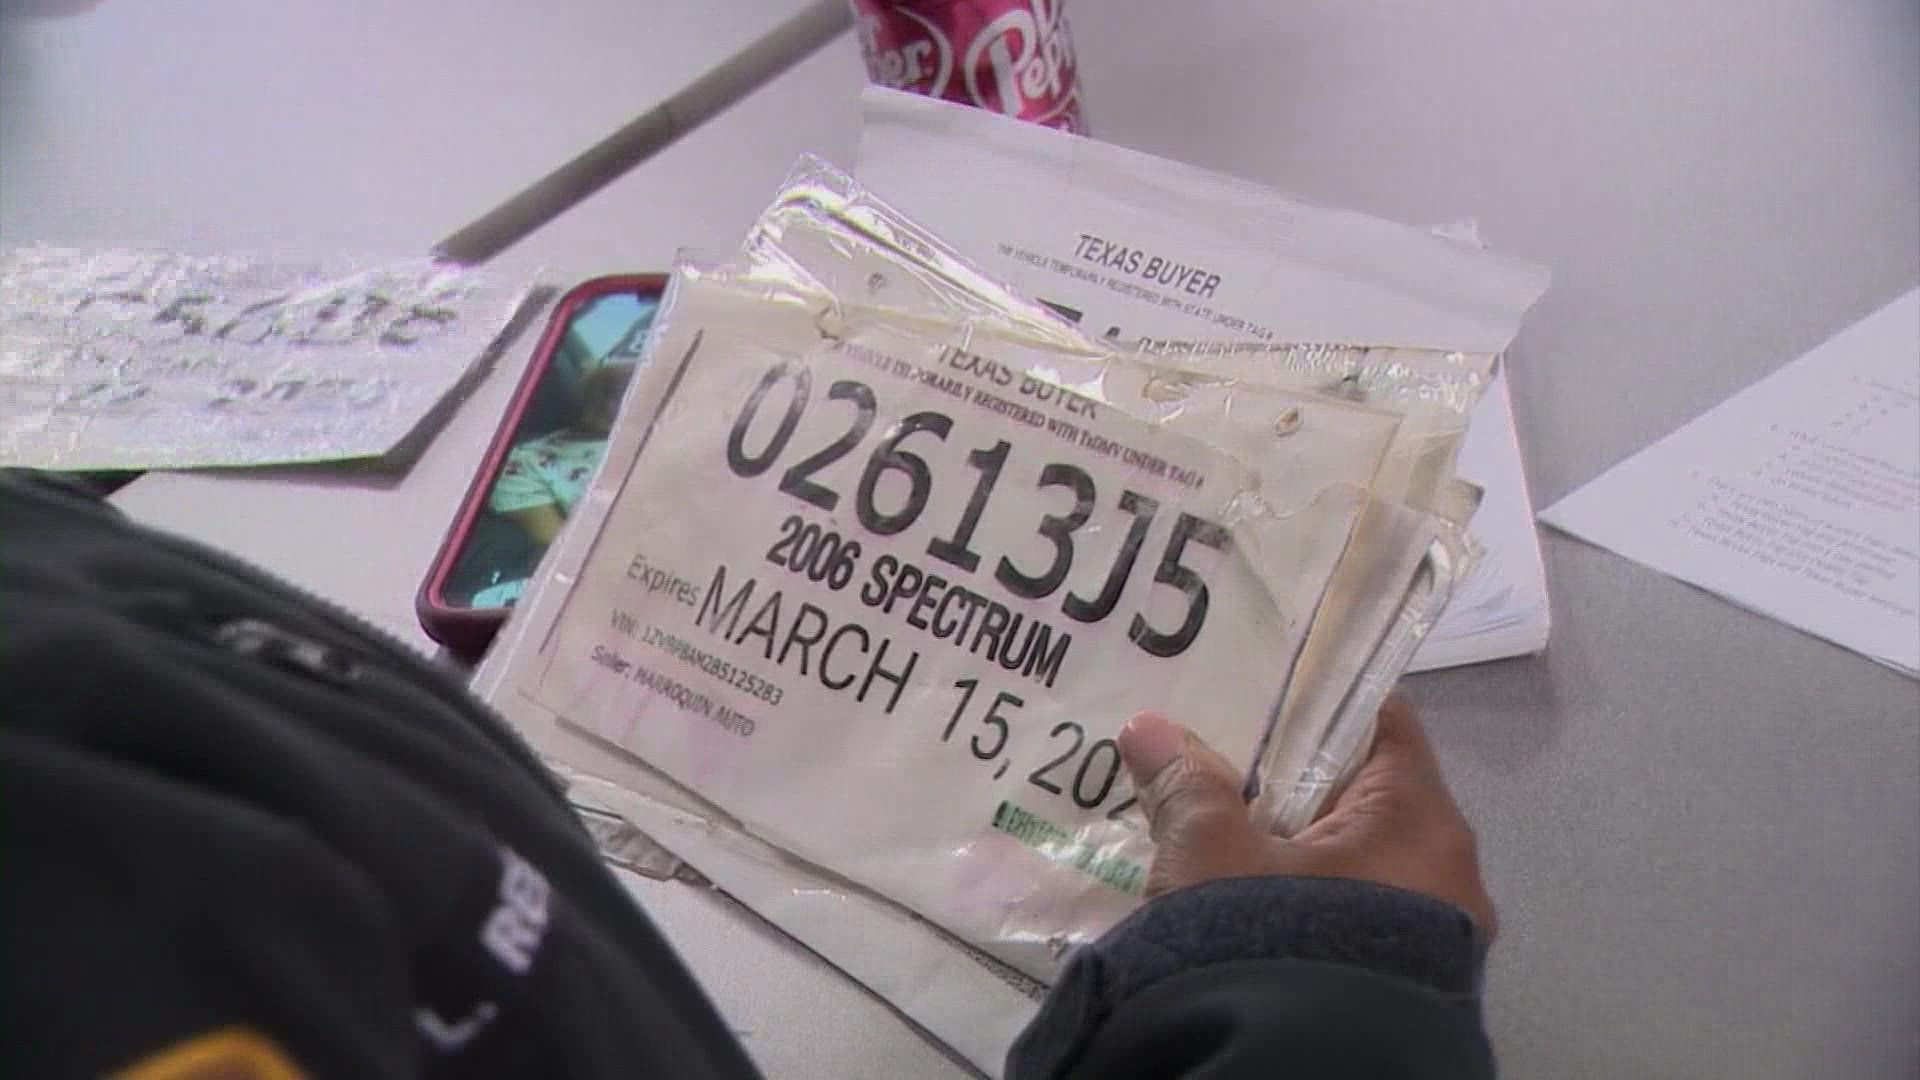 The fake tags are not only contributing to the crime issue here, they're costing Harris County millions off dollars in lost revenue, a DMV report says.